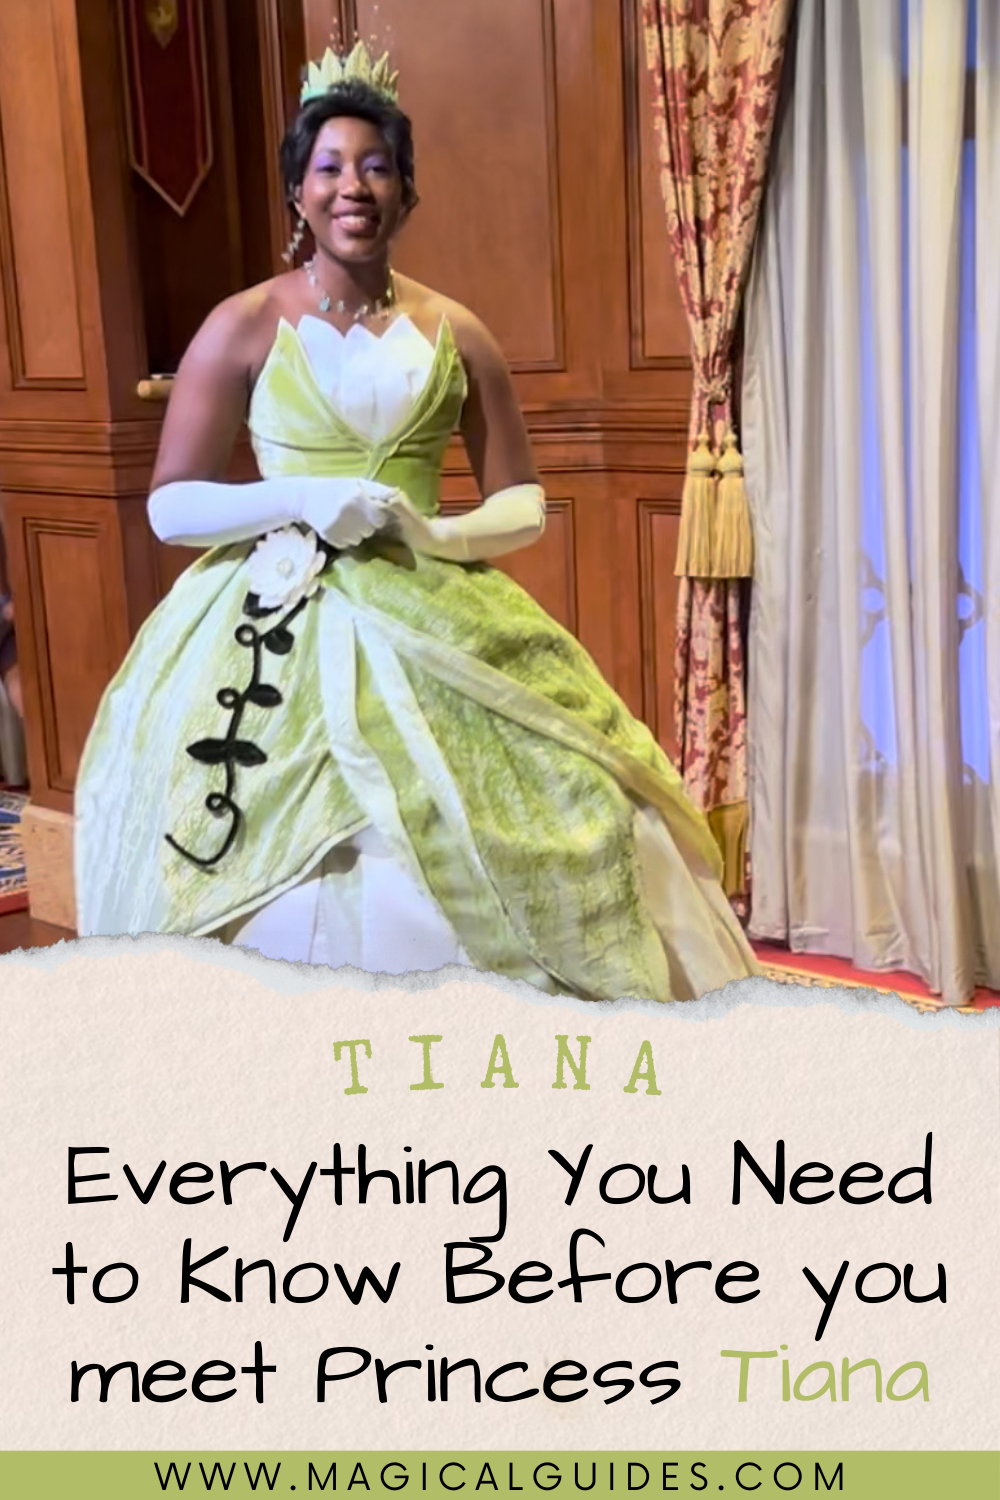 There are many places Princess and the Frog fans can meet Tiana at Disney World. Find where to meet Tiana at Disney World, Character Meals with Tiana, and what to ask her when you get to meet her. A complete guide to meeting Tiana at Walt Disney World on your next vacation.